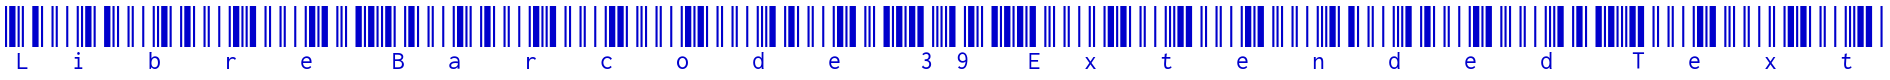 Libre Barcode 39 Extended Text フォント